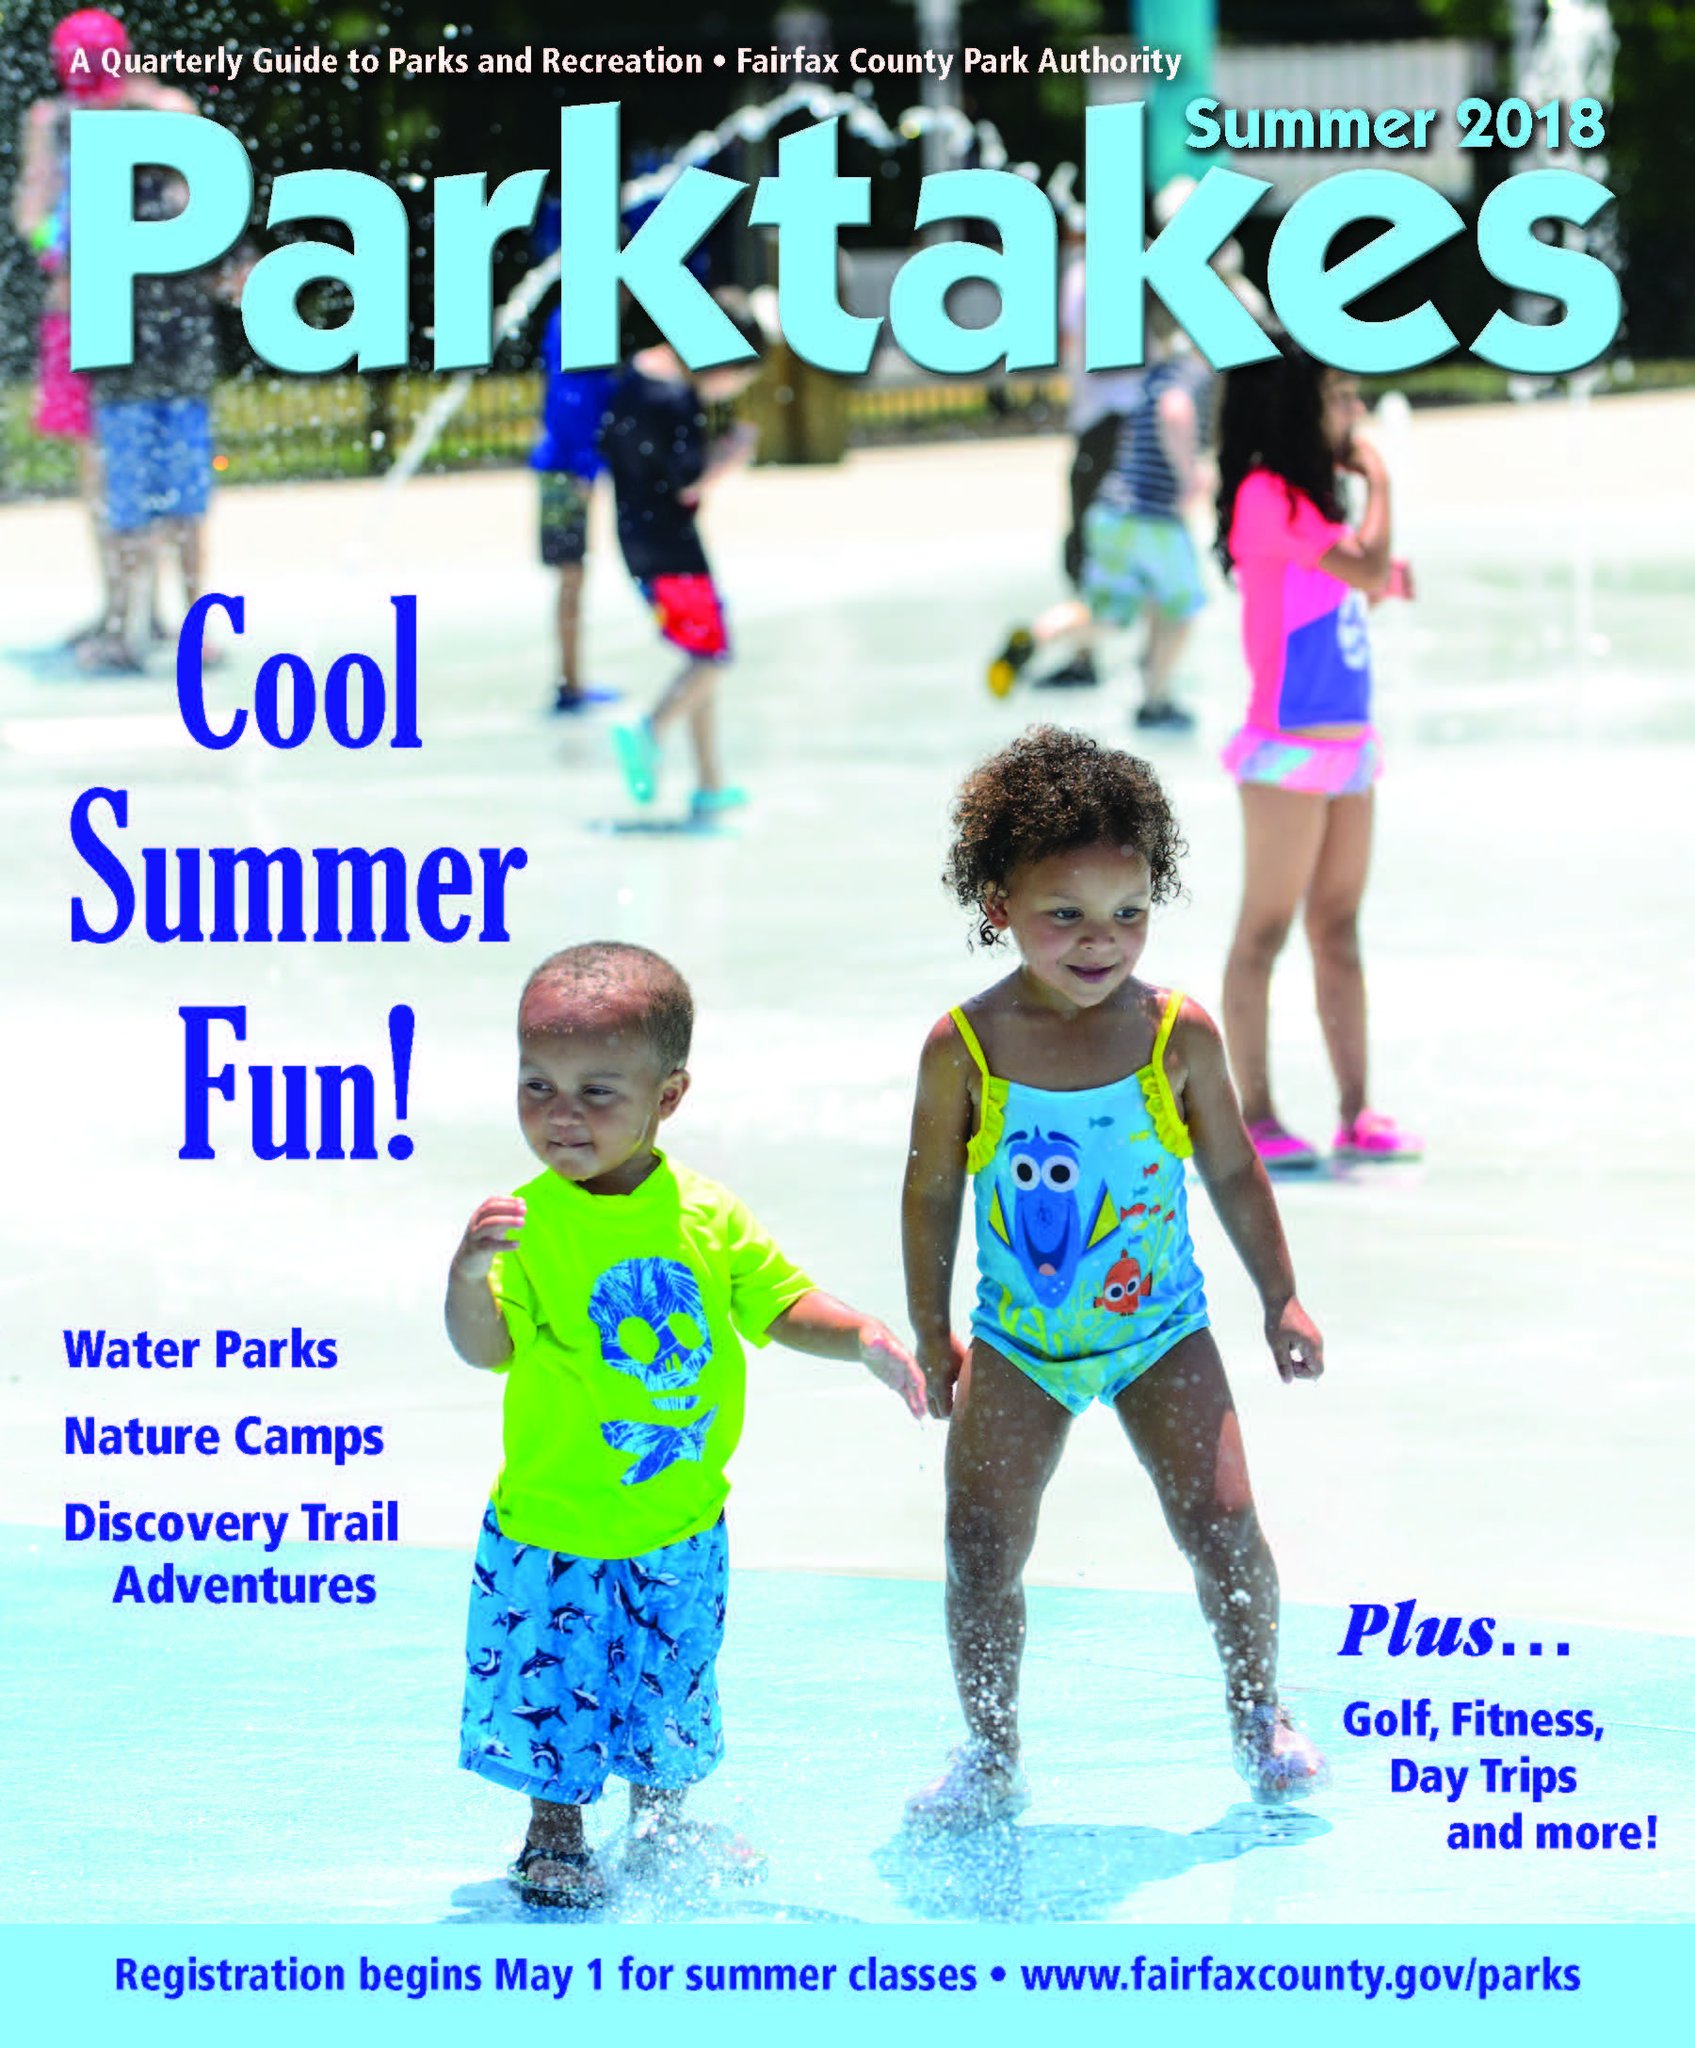 Fairfax County Parks on Twitter "Don't Summer registration